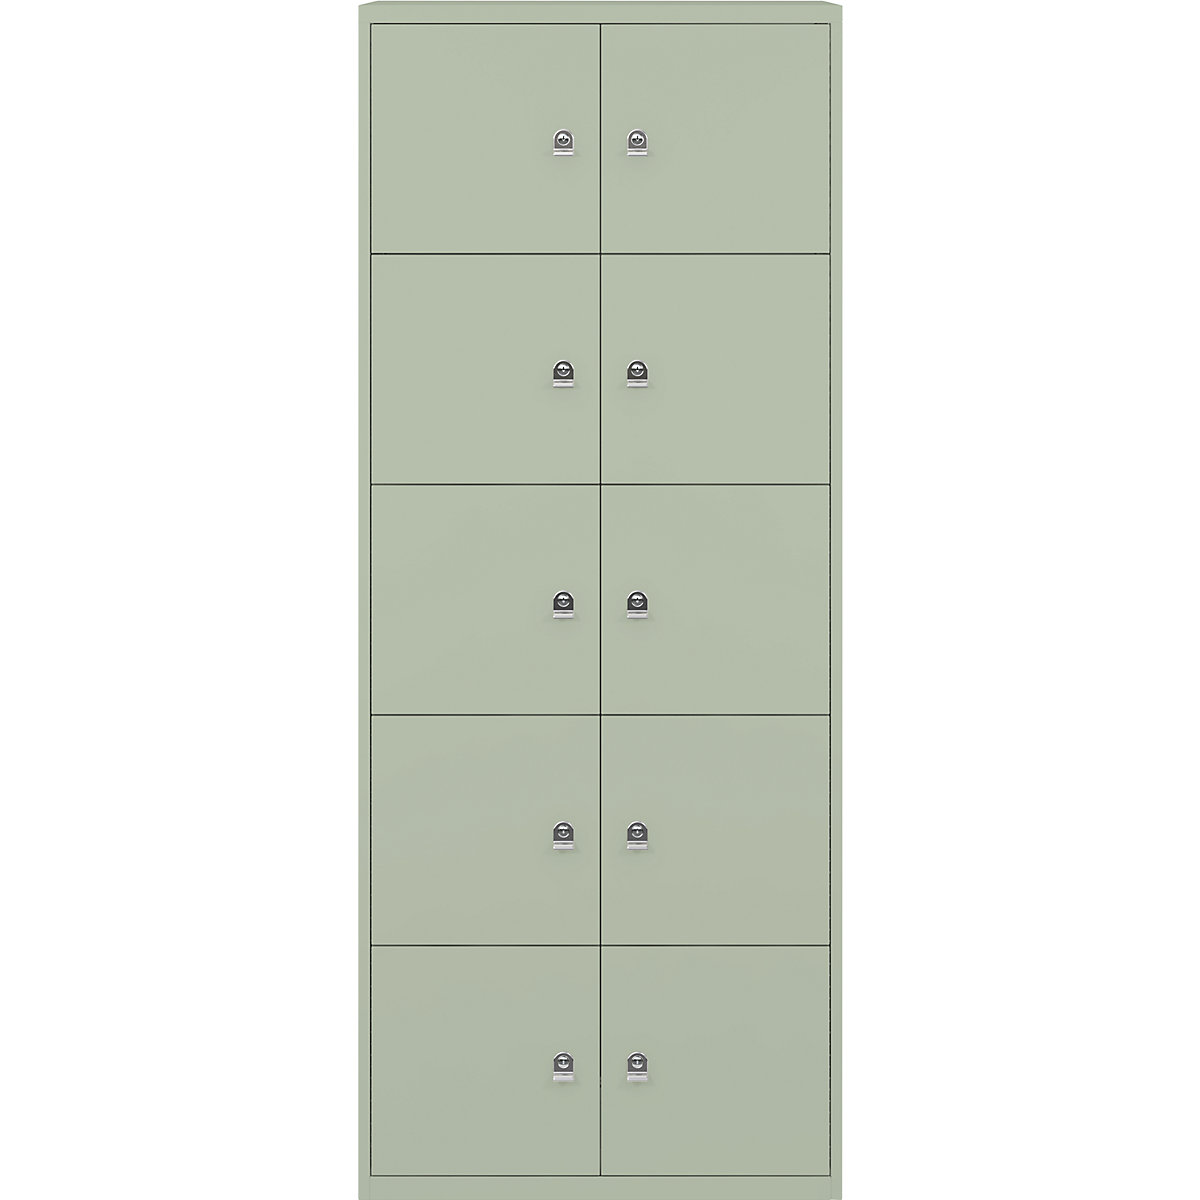 BISLEY – LateralFile™ lodge, with 10 lockable compartments, height 375 mm each, regent